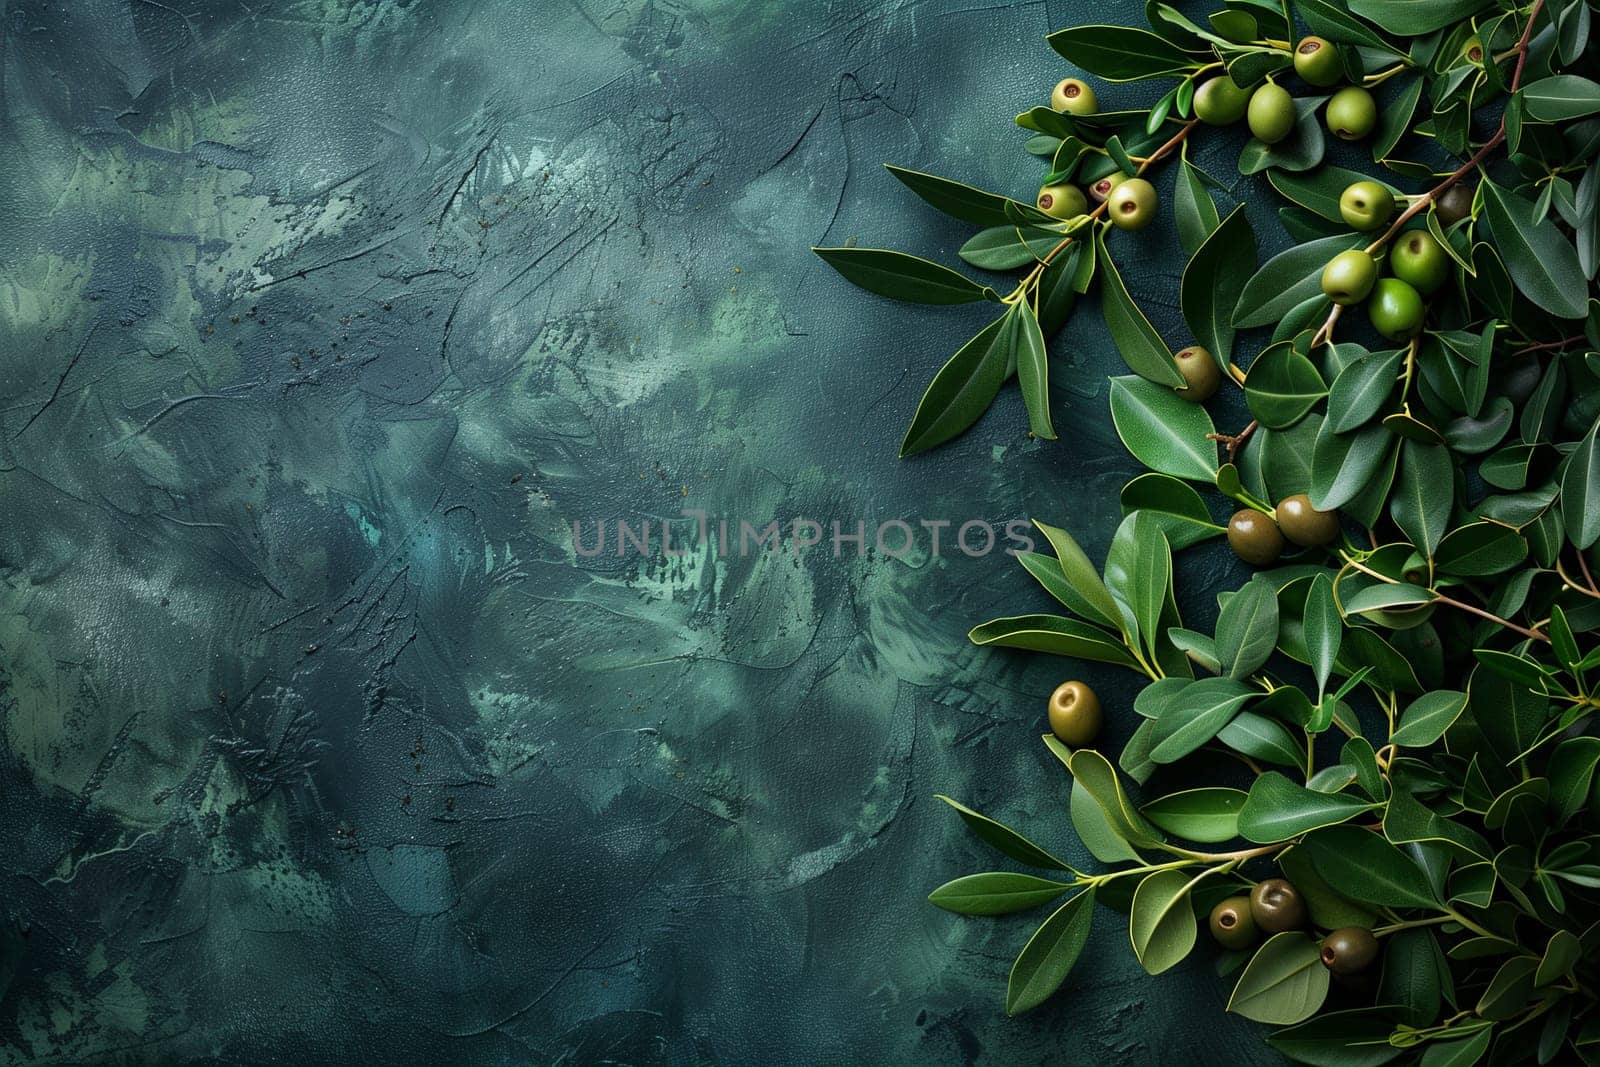 Fresh Green Olives on Branch Against Textured Background by Sd28DimoN_1976